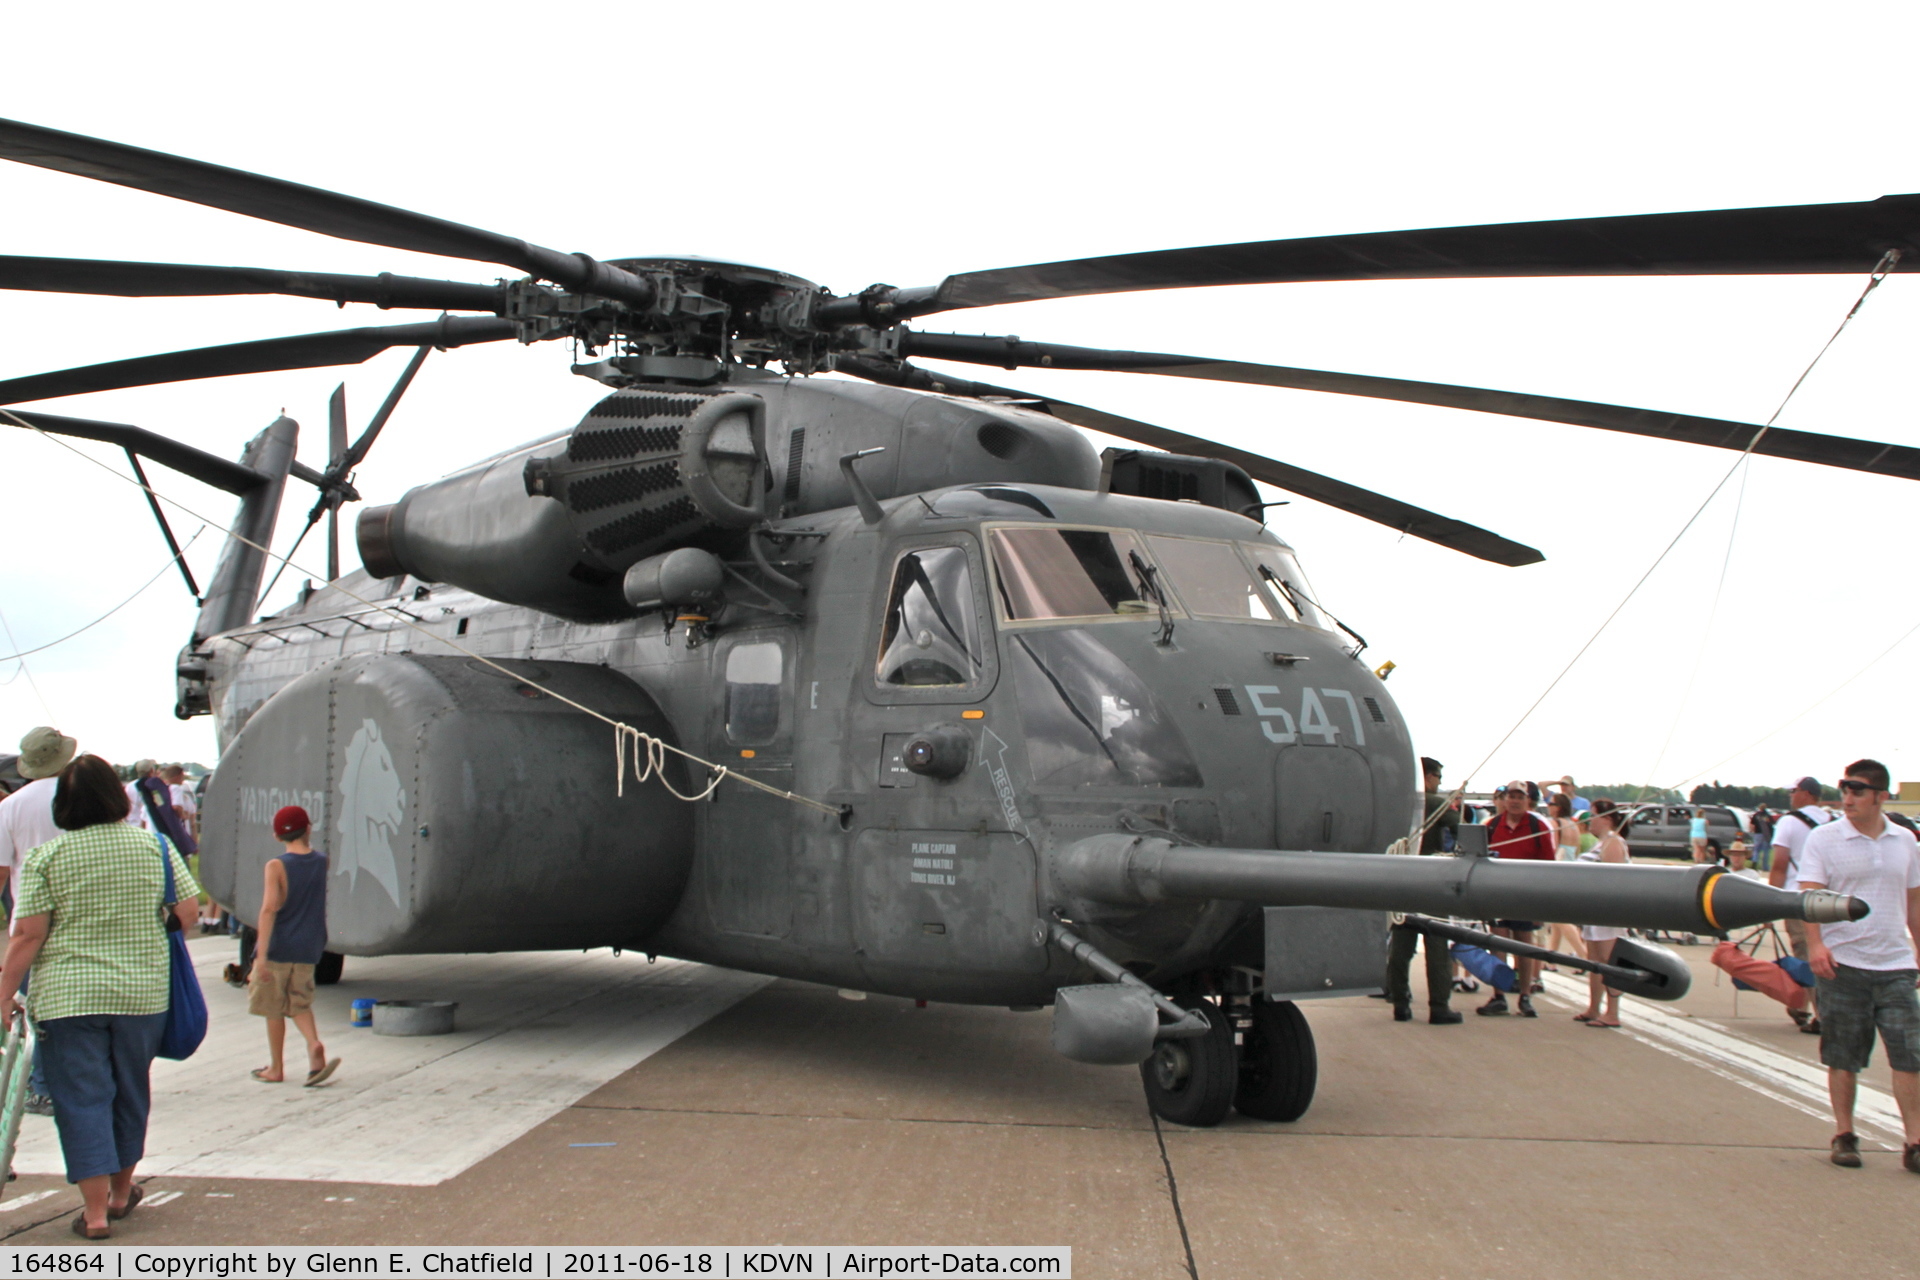 164864, Sikorsky MH-53E Sea Dragon C/N 65-620, At the Quad Cities Air Show.  Based in Norfolk, VA